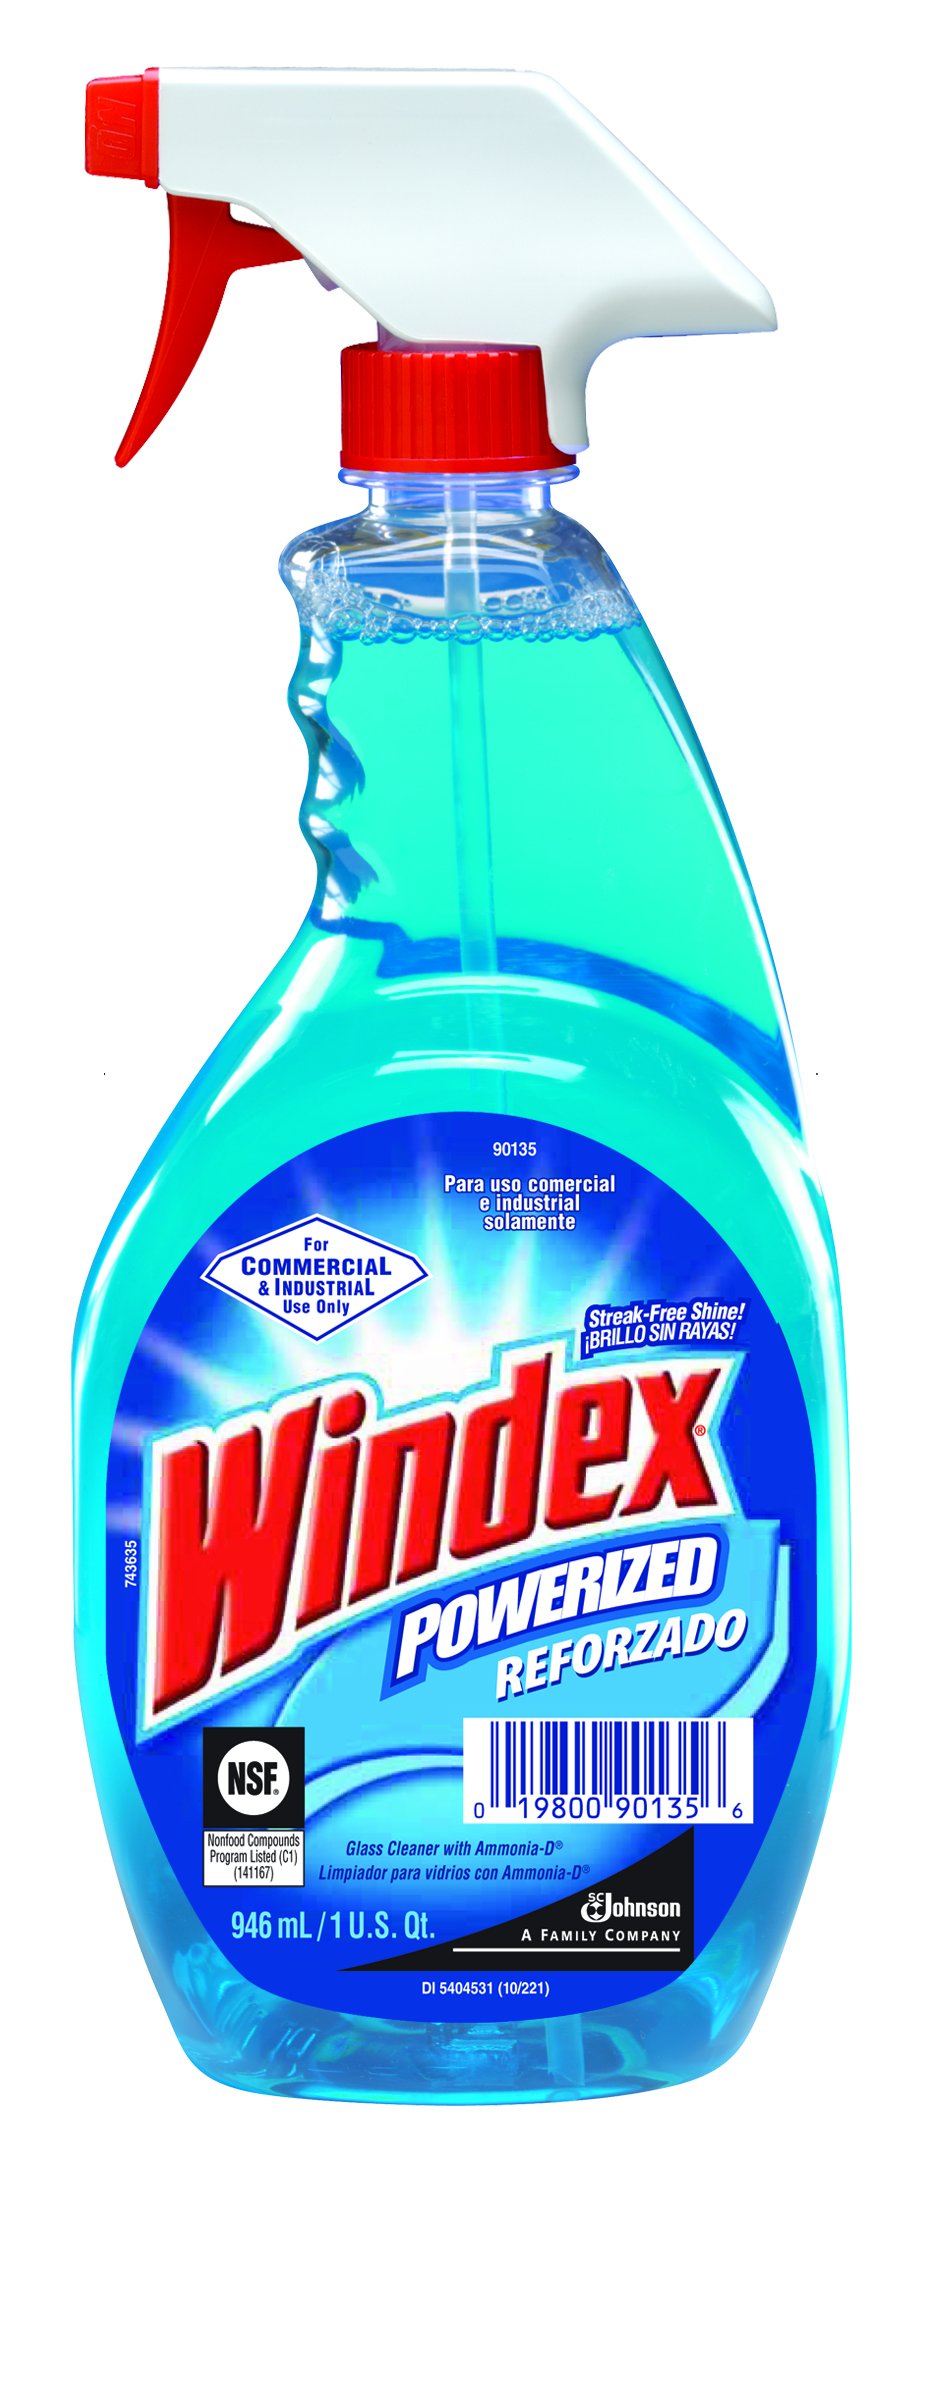 Windex Powerized Glass Cleaner with Ammonia-D (32-Ounce, 12-Pack, Capped Bottles)